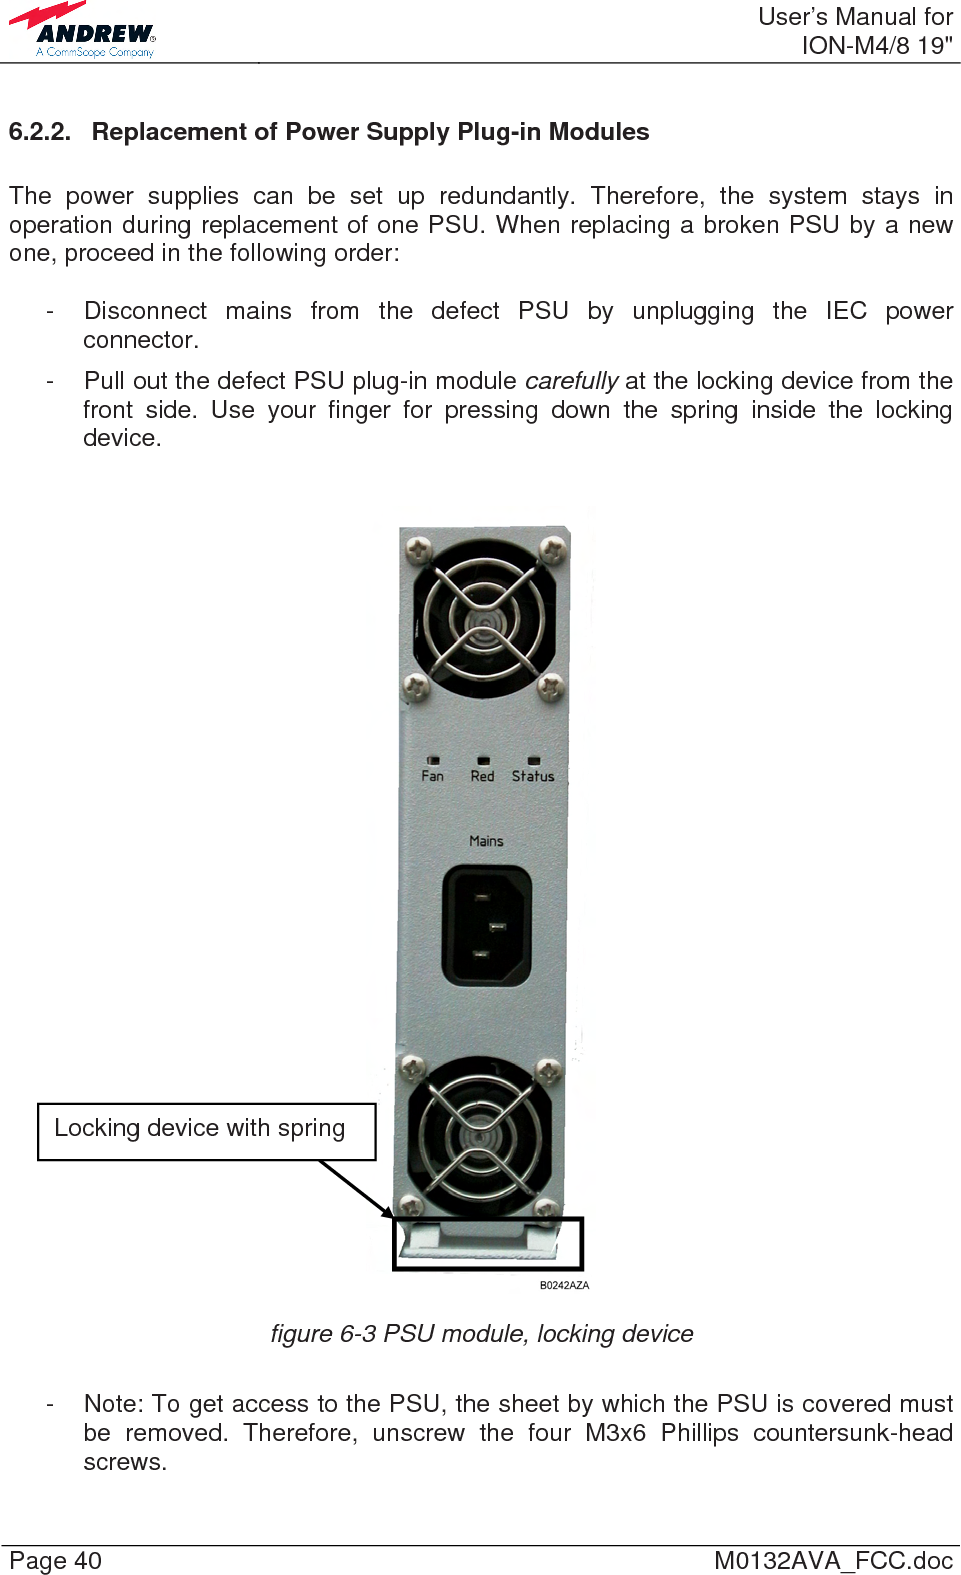  User’s Manual forION-M4/8 19&quot; Page 40  M0132AVA_FCC.doc 6.2.2.  Replacement of Power Supply Plug-in Modules  The power supplies can be set up redundantly. Therefore, the system stays in operation during replacement of one PSU. When replacing a broken PSU by a new one, proceed in the following order:  -  Disconnect mains from the defect PSU by unplugging the IEC power connector. -  Pull out the defect PSU plug-in module carefully at the locking device from the front side. Use your finger for pressing down the spring inside the locking device.   figure 6-3 PSU module, locking device  -  Note: To get access to the PSU, the sheet by which the PSU is covered must be removed. Therefore, unscrew the four M3x6 Phillips countersunk-head screws. Locking device with spring 